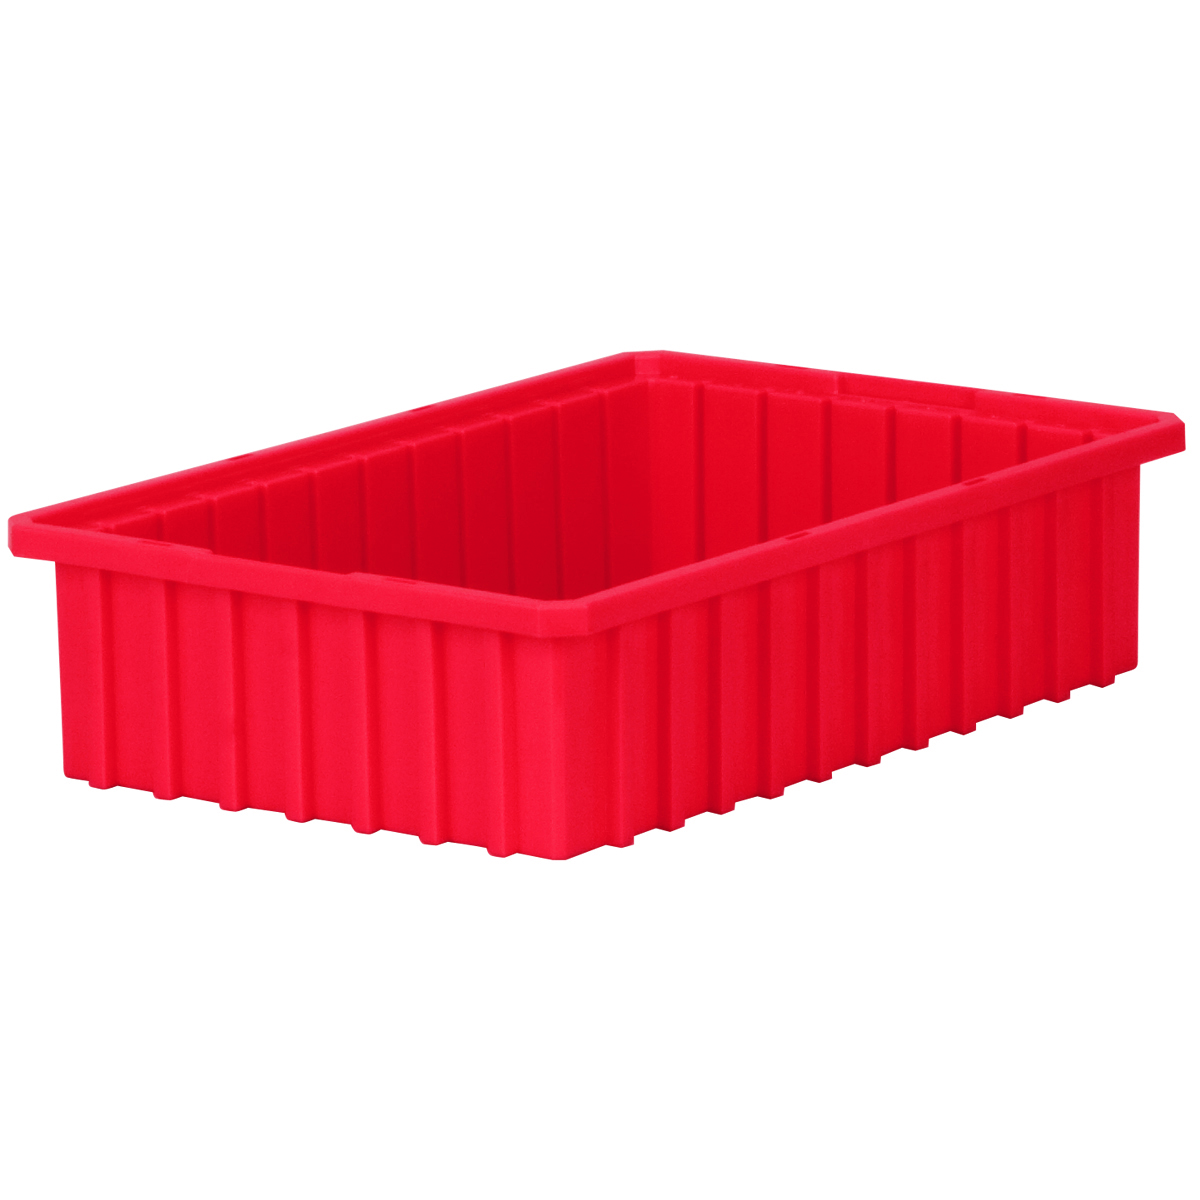 Akro Mils 42164 Long Divider for 33164 Grid Slotted Plastic Tote Box Pack of 6 